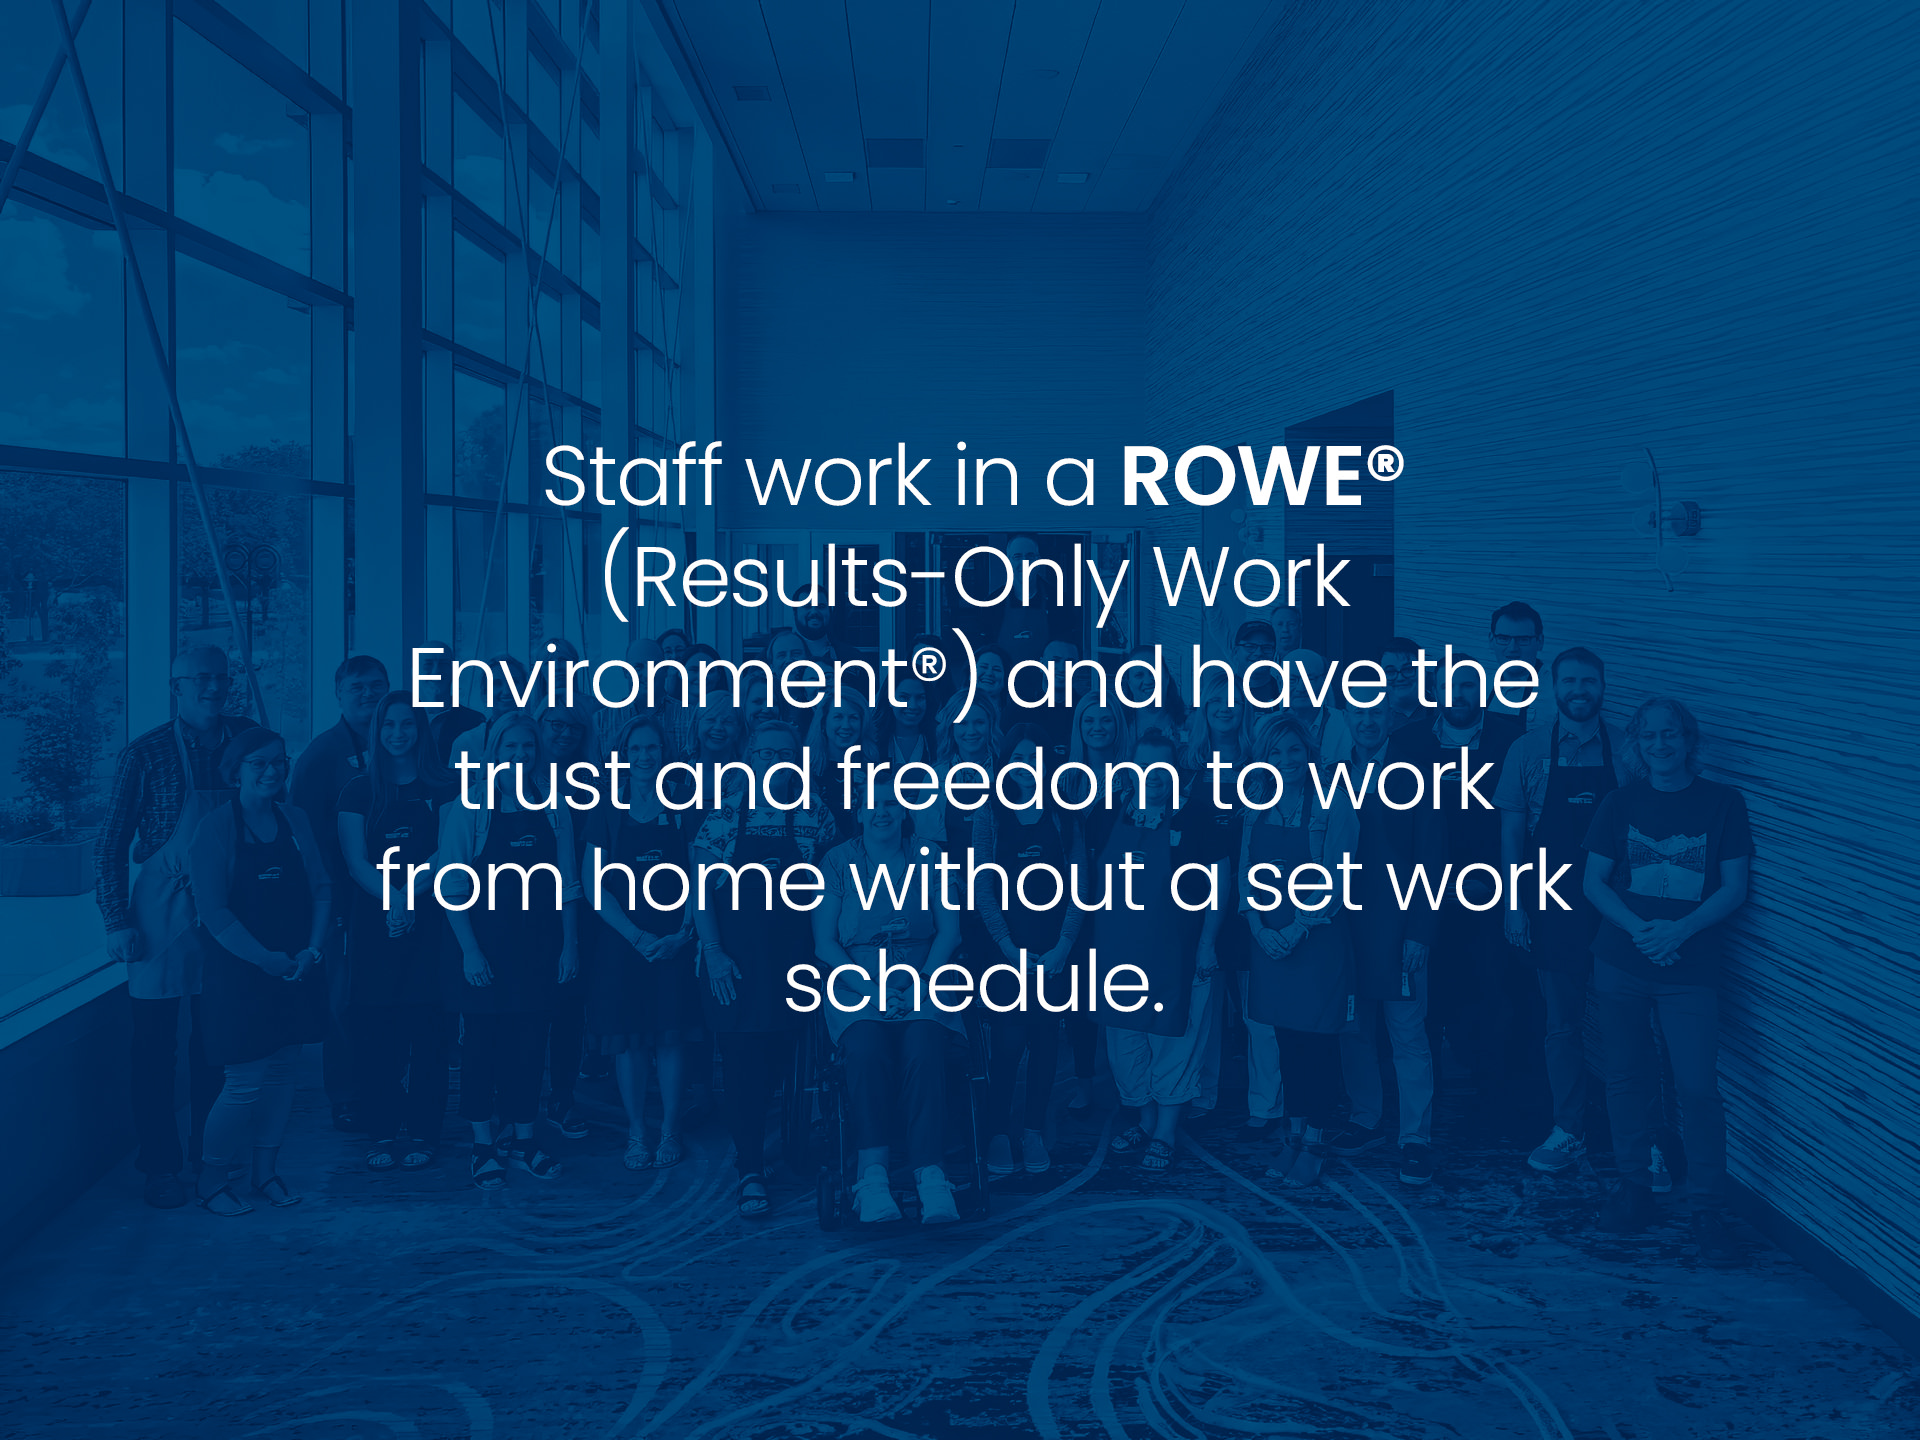 Staff work in a ROWE® (Results-Only Work Environment®) and have the trust and freedom to work from home without a set work schedule.